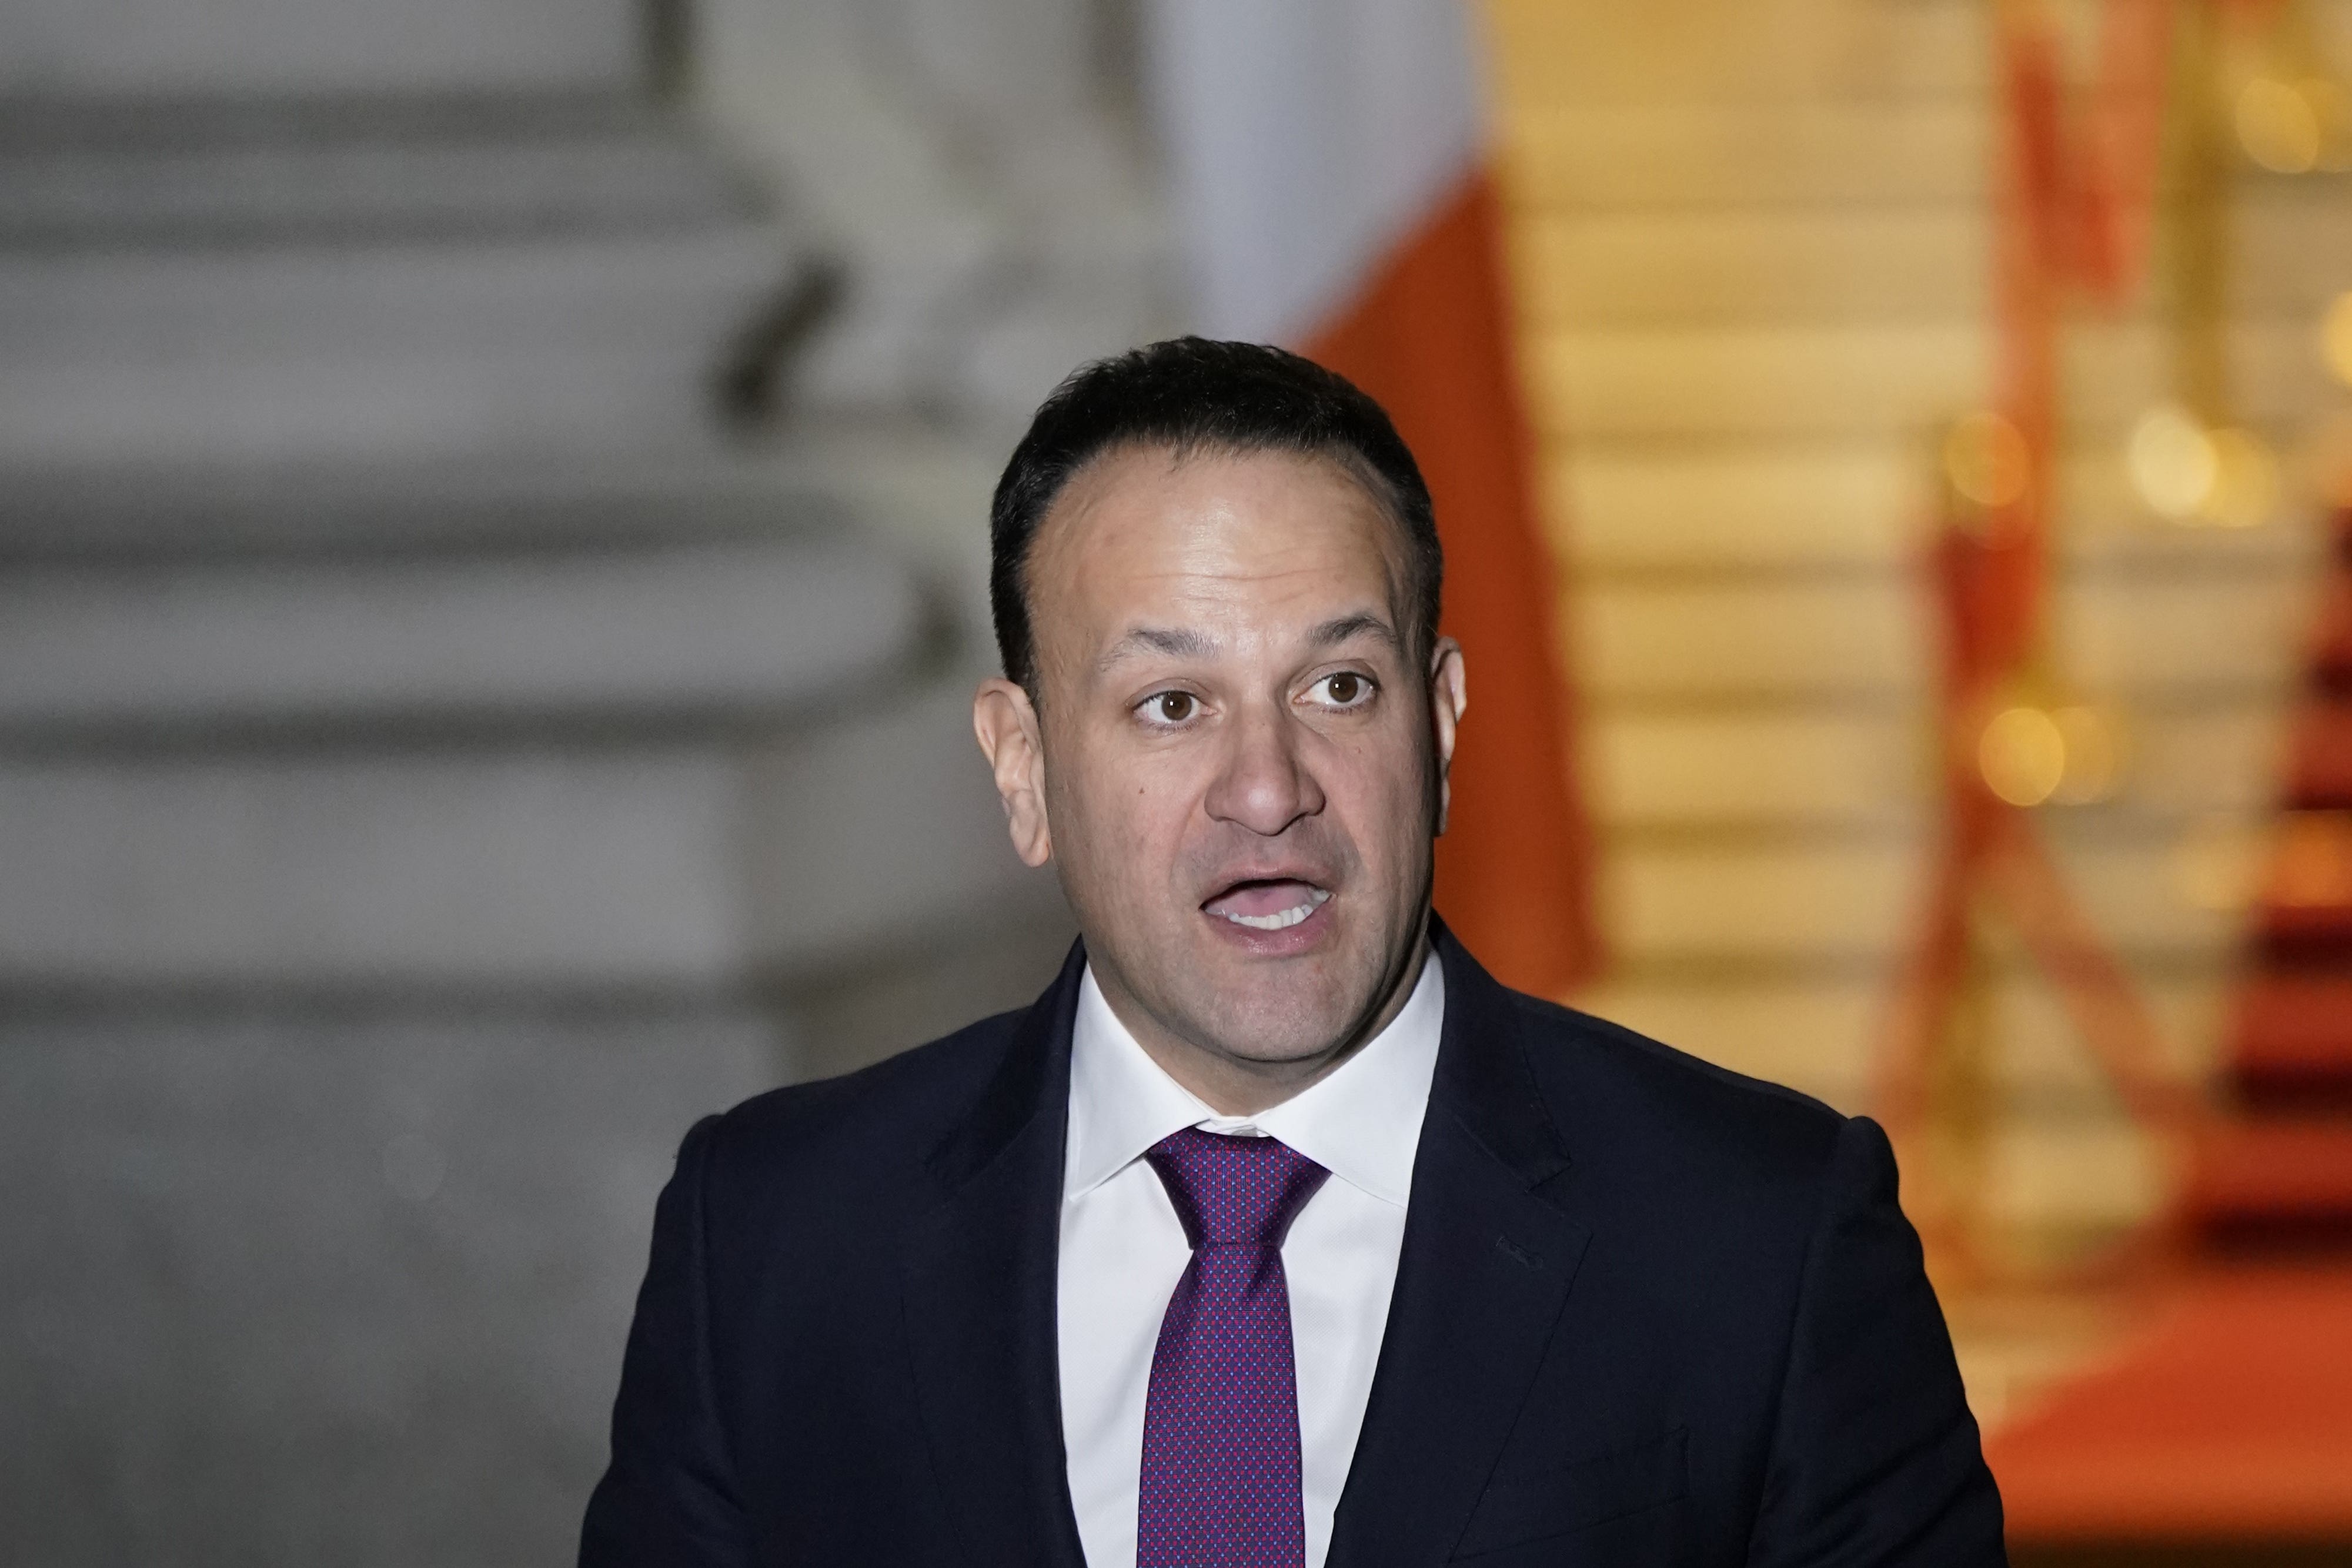 Irish premier Leo Varadkar said it is “reasonable” for the DUP to be given time to consider the agreement struck between the EU and the UK (PA)